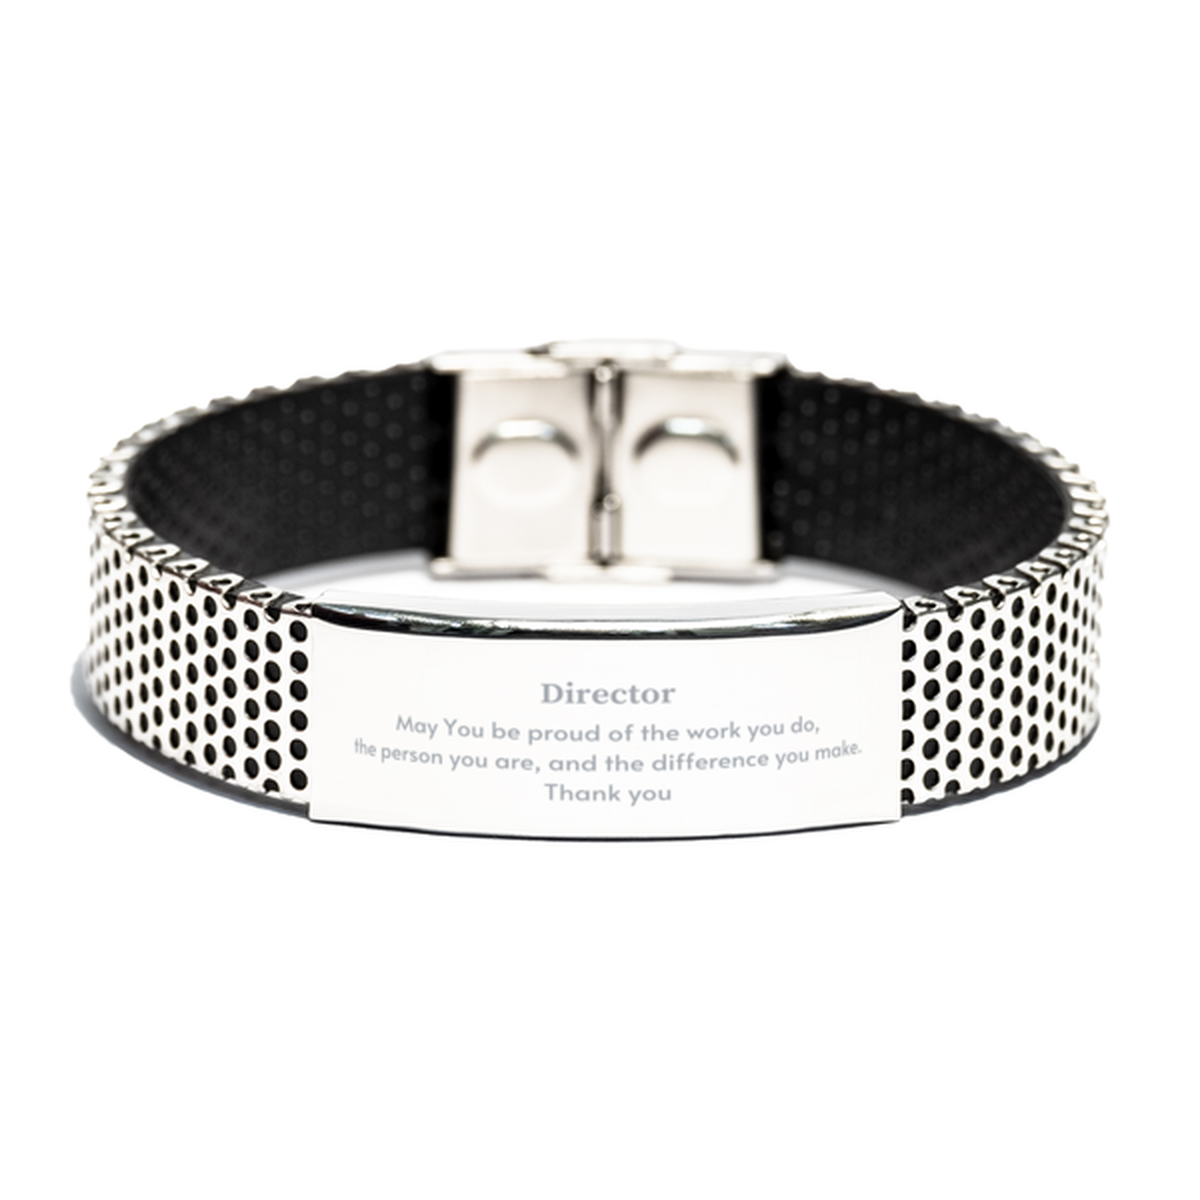 Heartwarming Stainless Steel Bracelet Retirement Coworkers Gifts for Director, Director May You be proud of the work you do, the person you are Gifts for Boss Men Women Friends